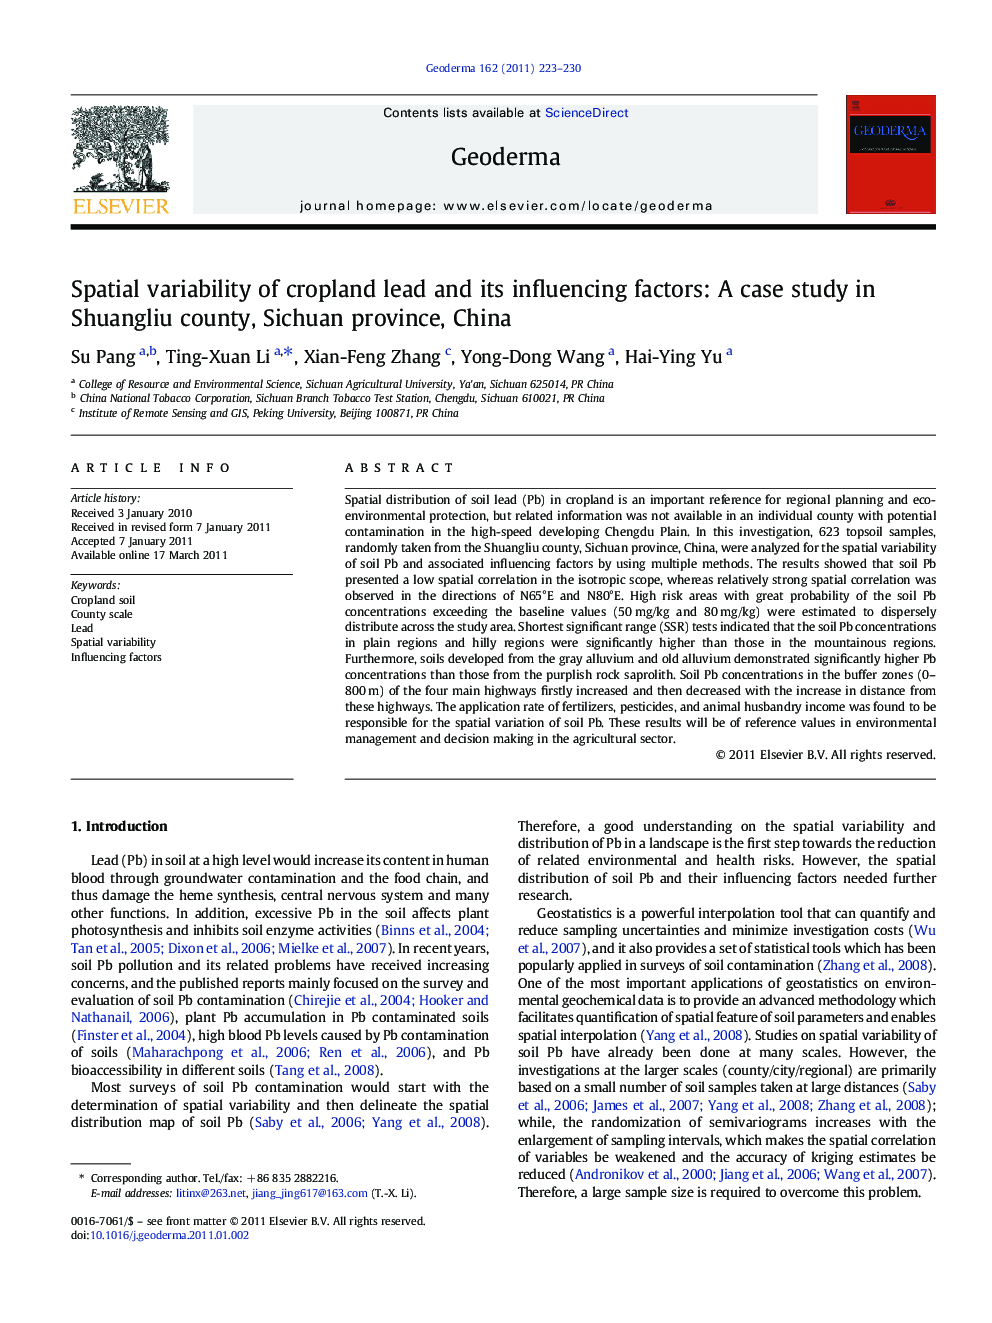 Spatial variability of cropland lead and its influencing factors: A case study in Shuangliu county, Sichuan province, China